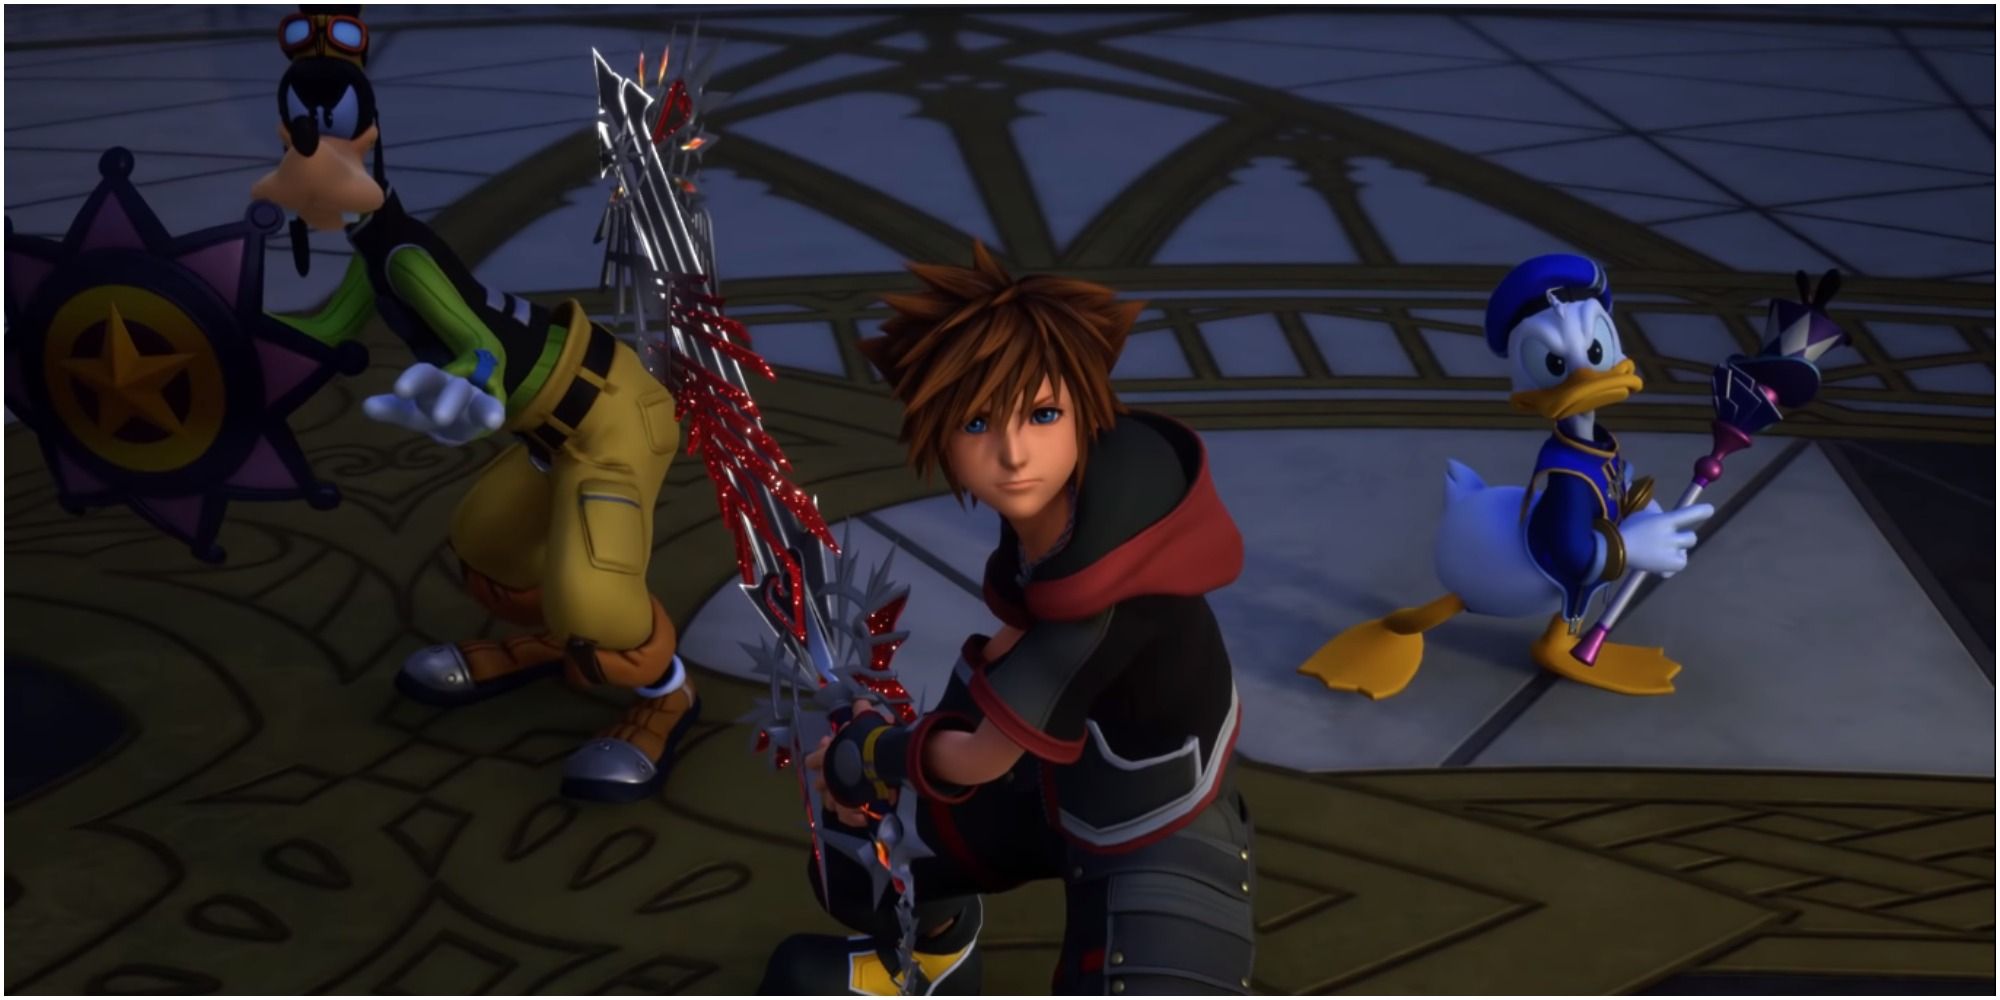 Sora holding the Ultima Weapon with Goofy and Donald beside him in Kingdom Hearts 3.